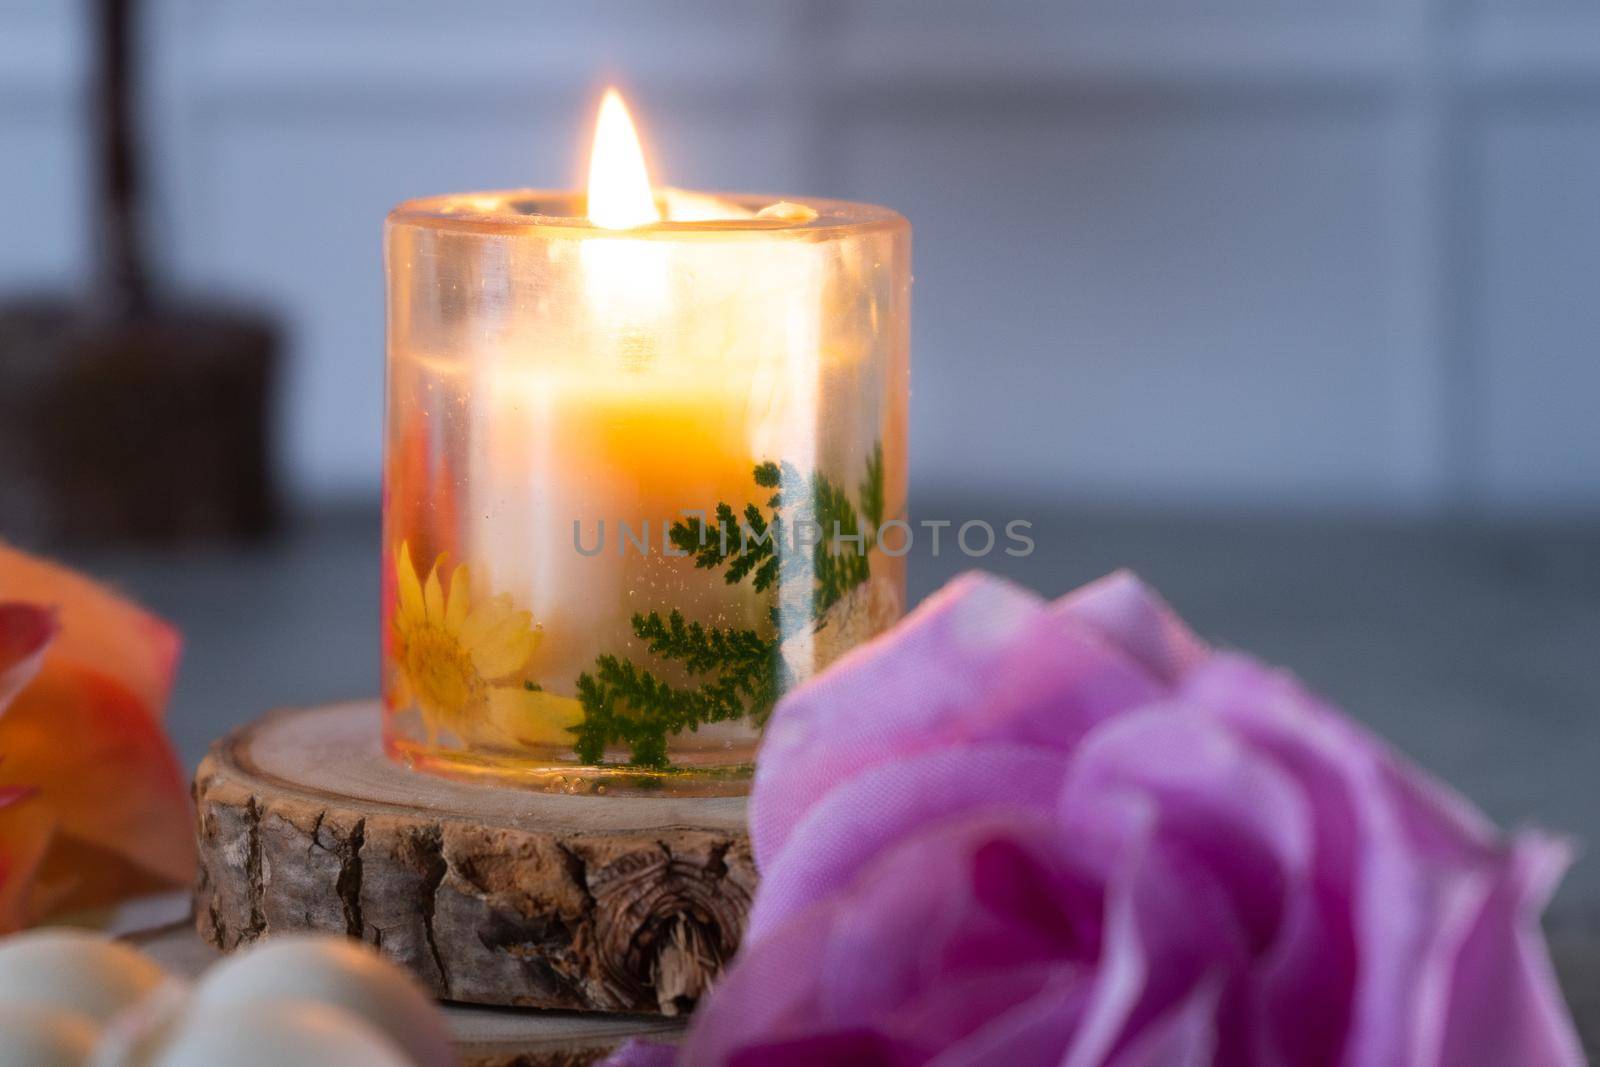 Lit resin art transparent candle on wood coaster with flowers showing the decoration of diwali, christmas, new year shot in pastel shades by Shalinimathur